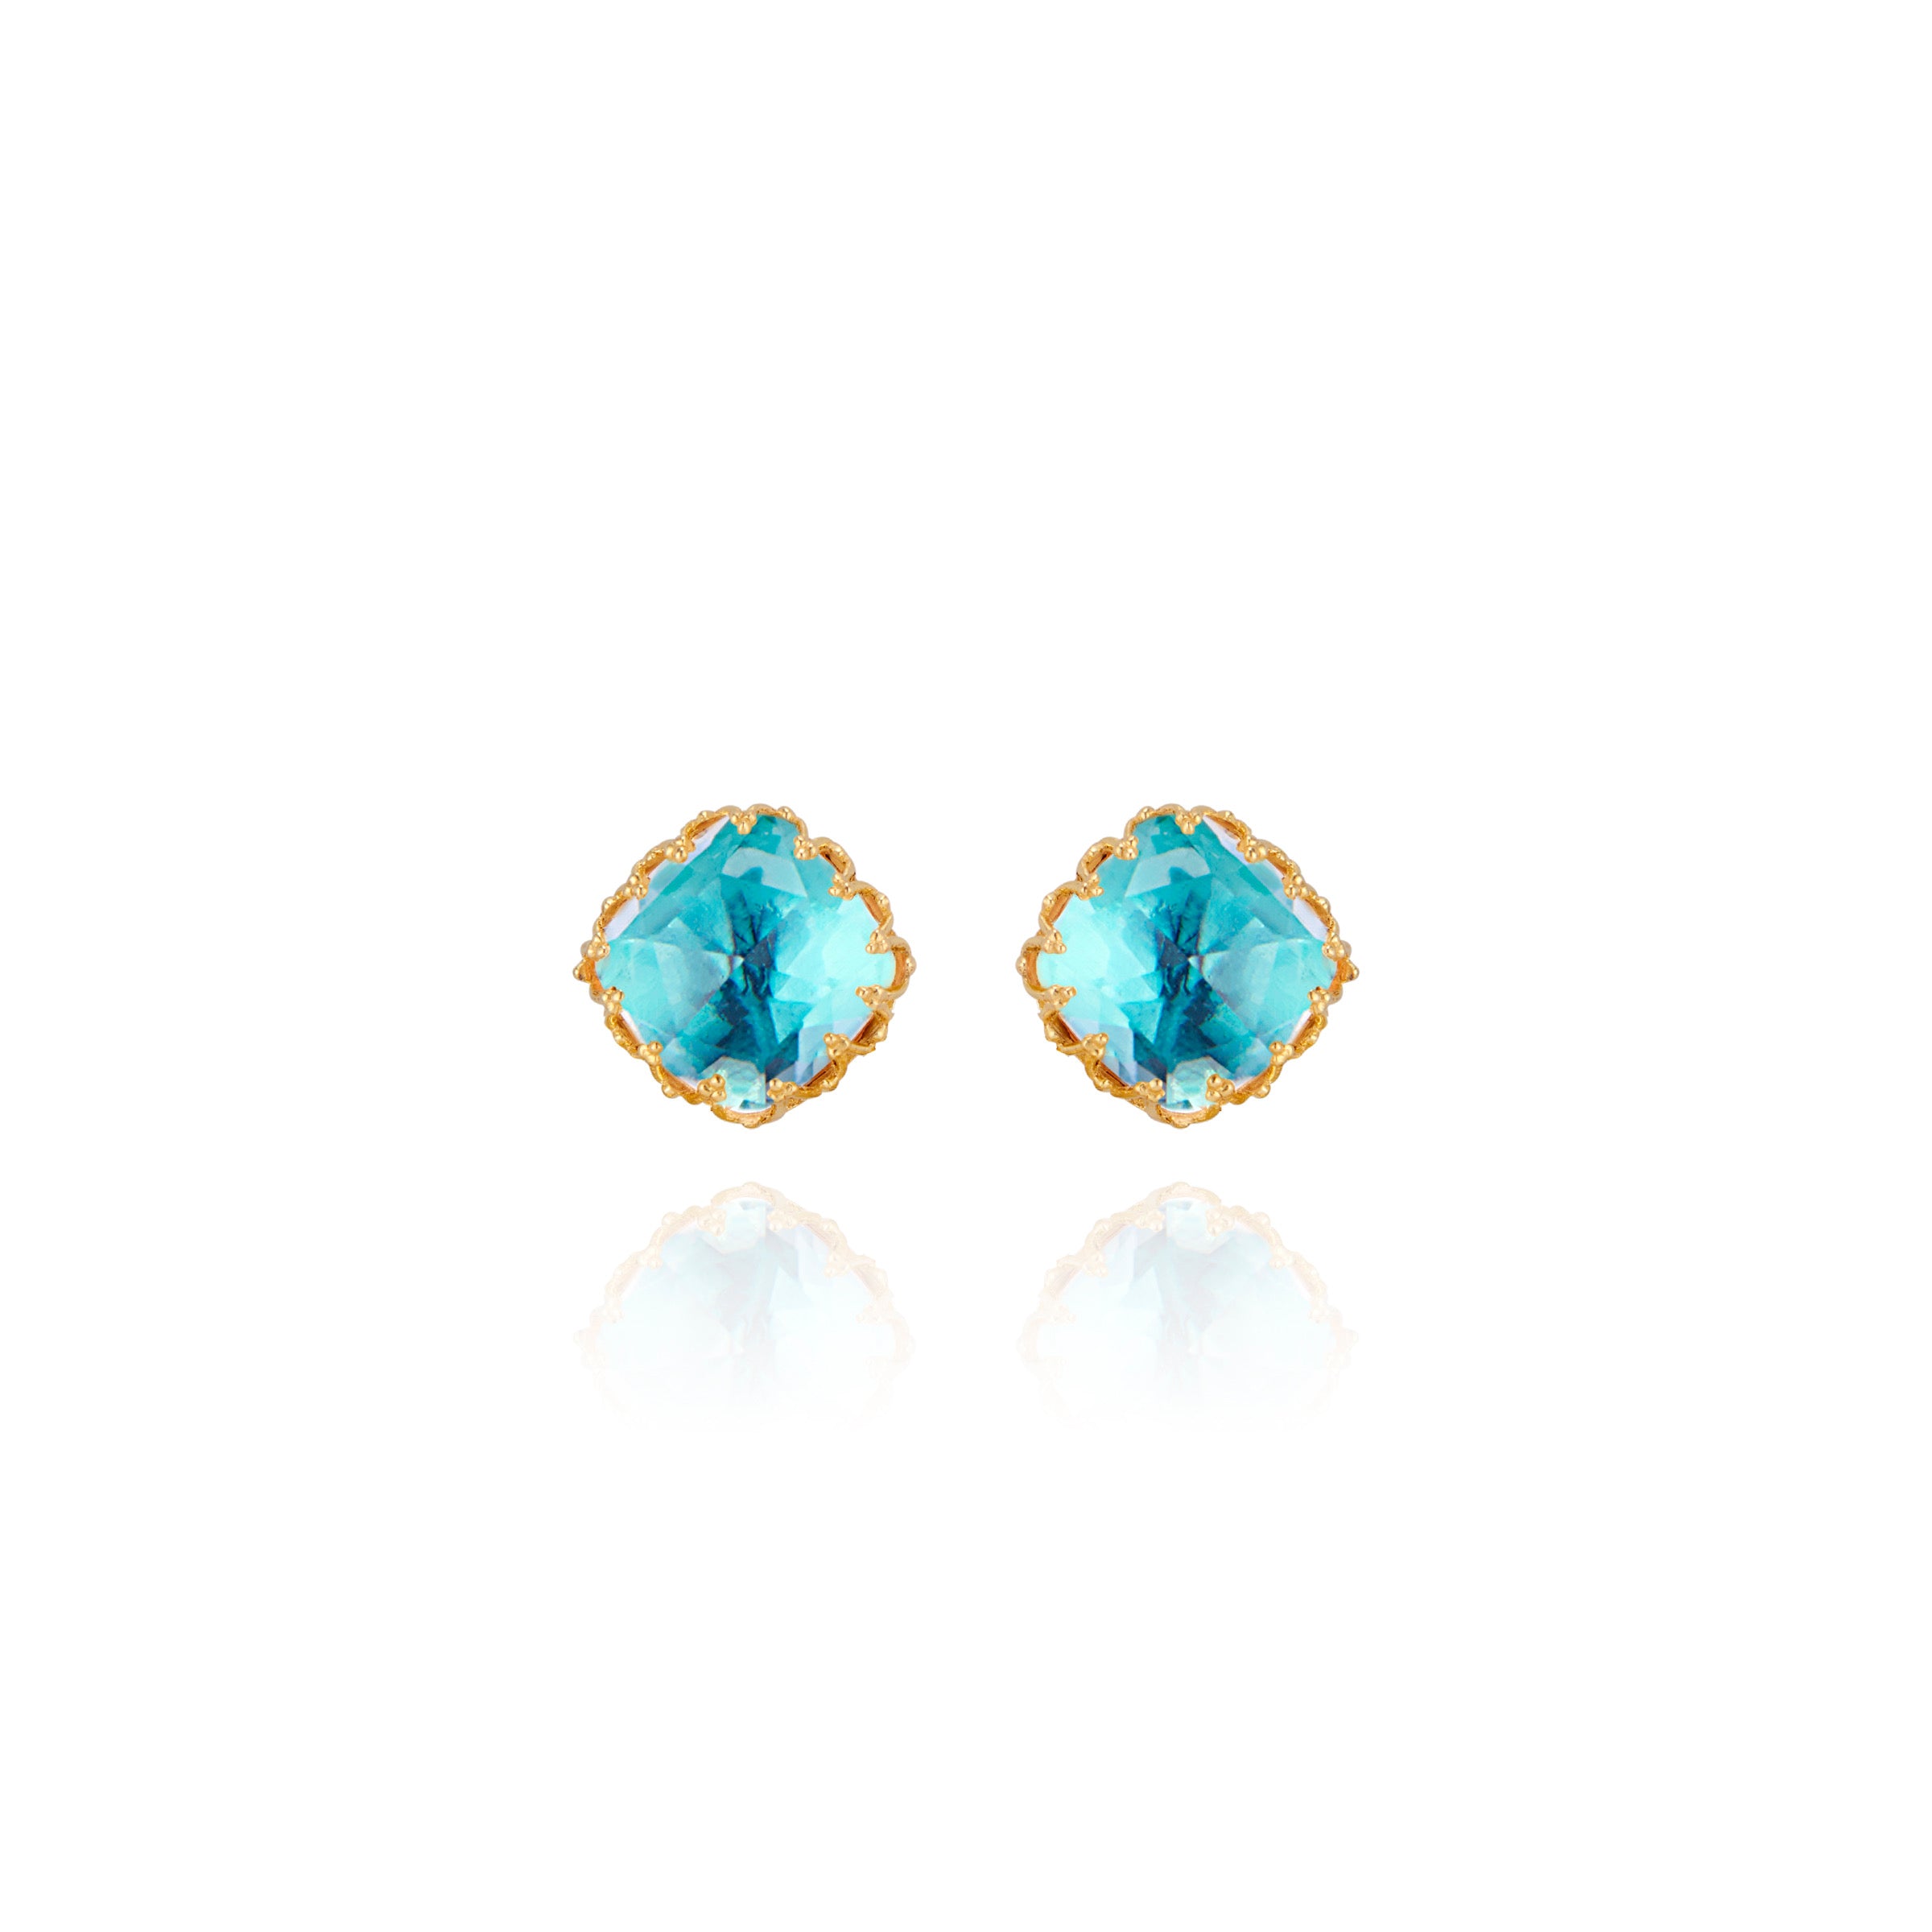 Jane Small Post Earrings (Black Rhodium or Yellow Gold Wash)